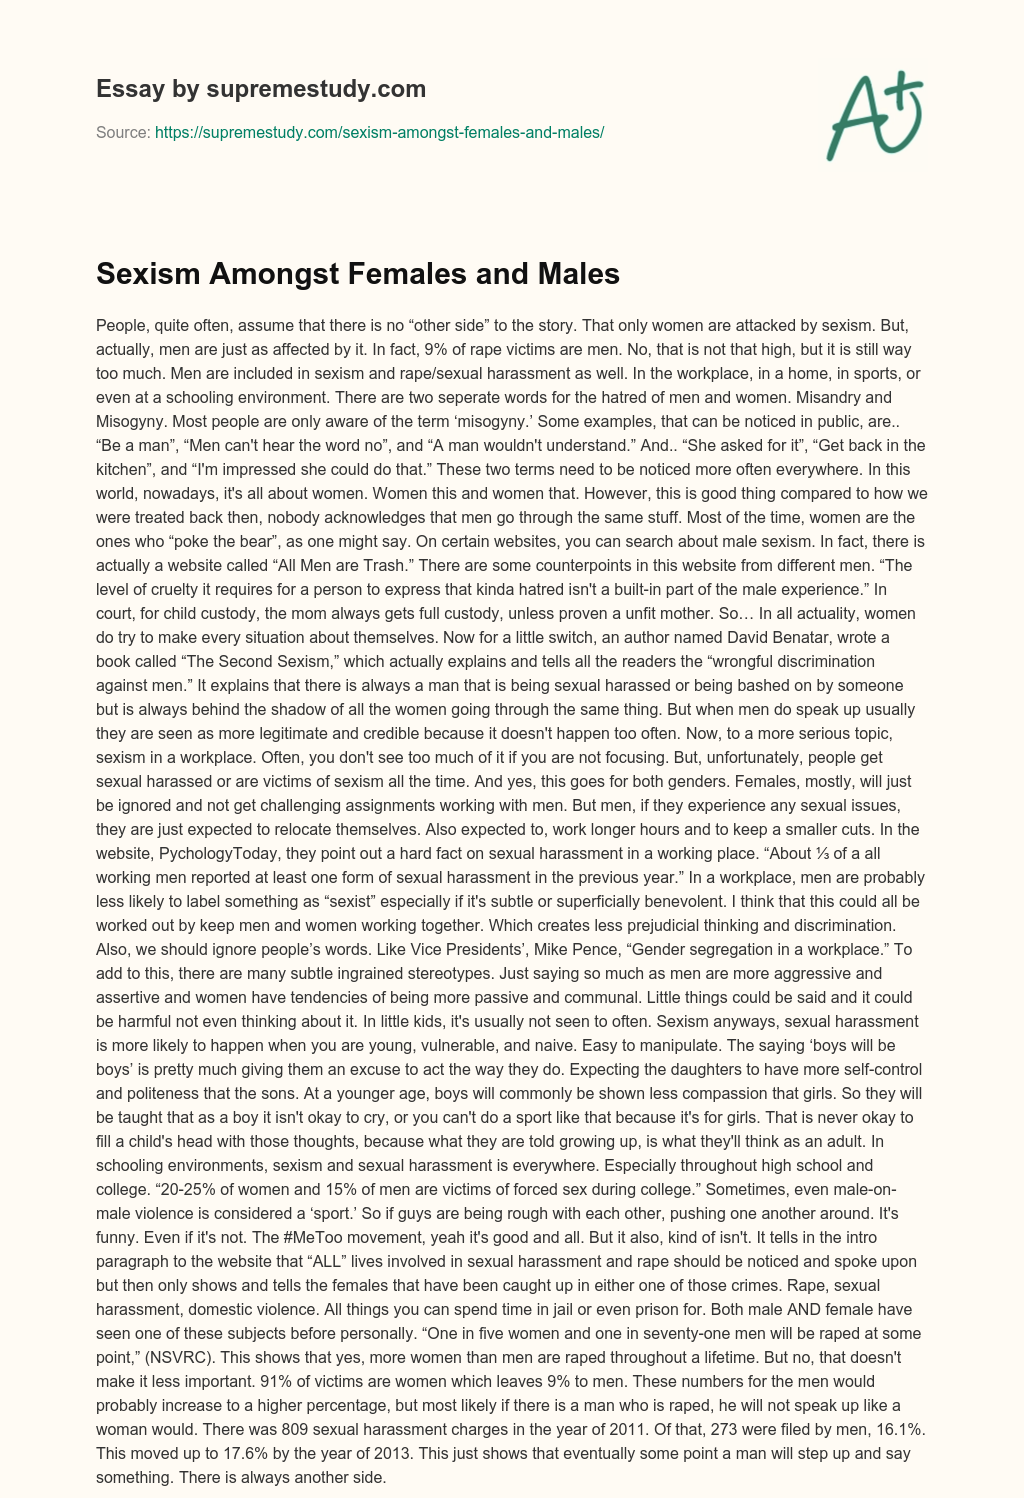 Sexism Amongst Females and Males essay